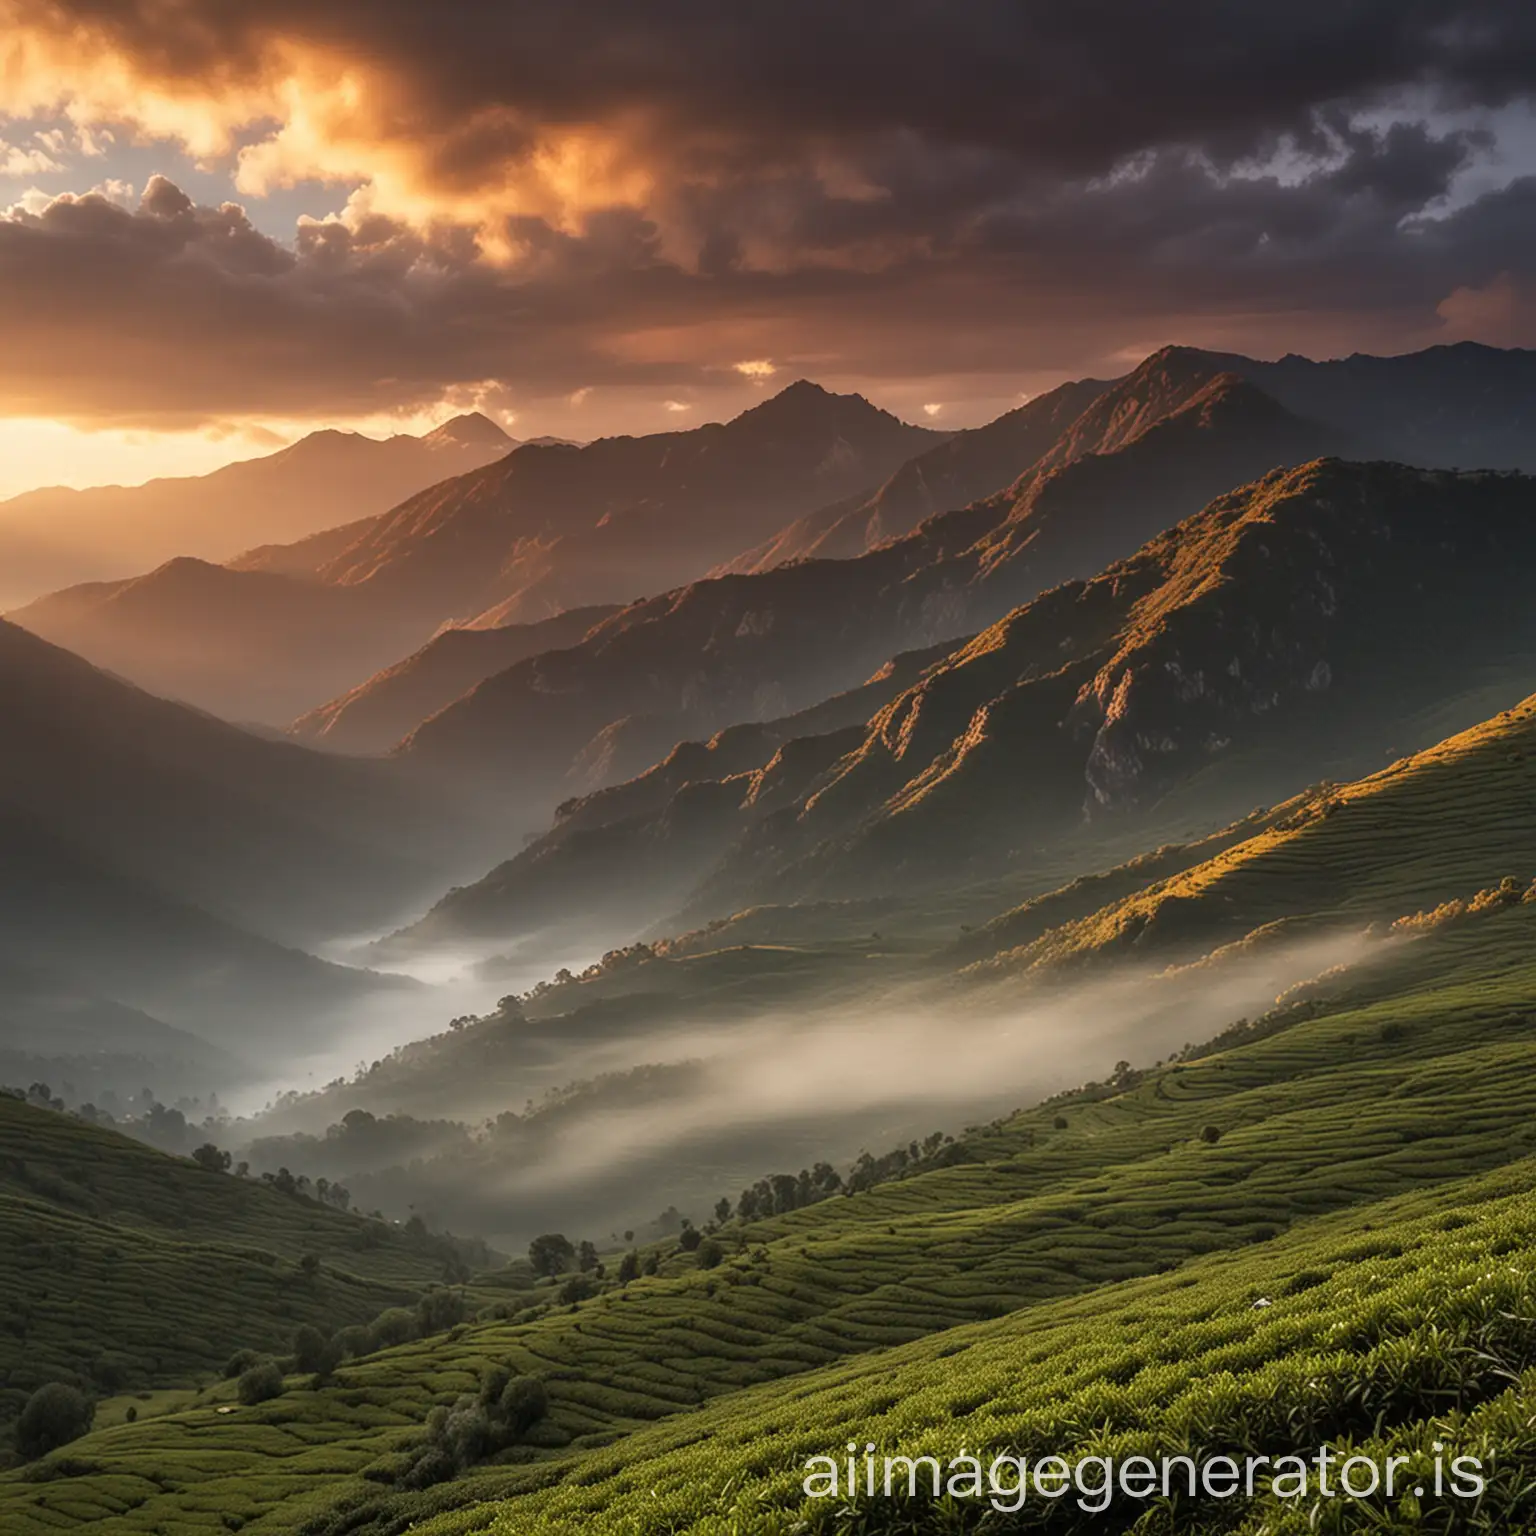 Mountains producing tea, back of moutains sunrises and lighting and clouds